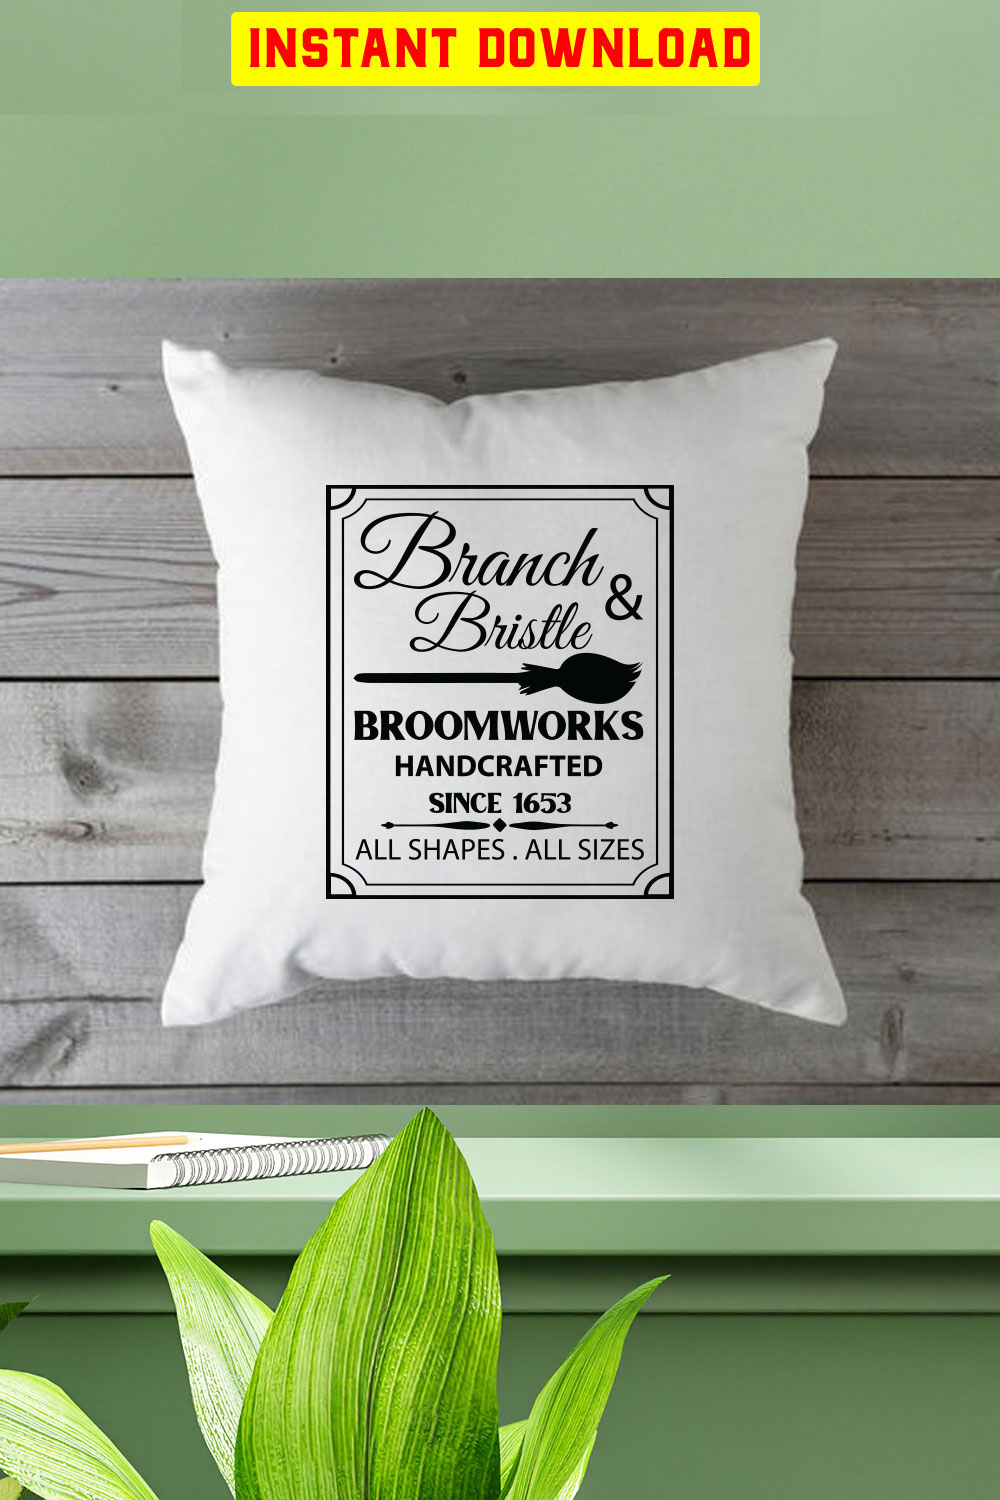 Branch & Bristle Broomworks Handcrafted Since 1653 All Shapes  All Sizes pinterest preview image.